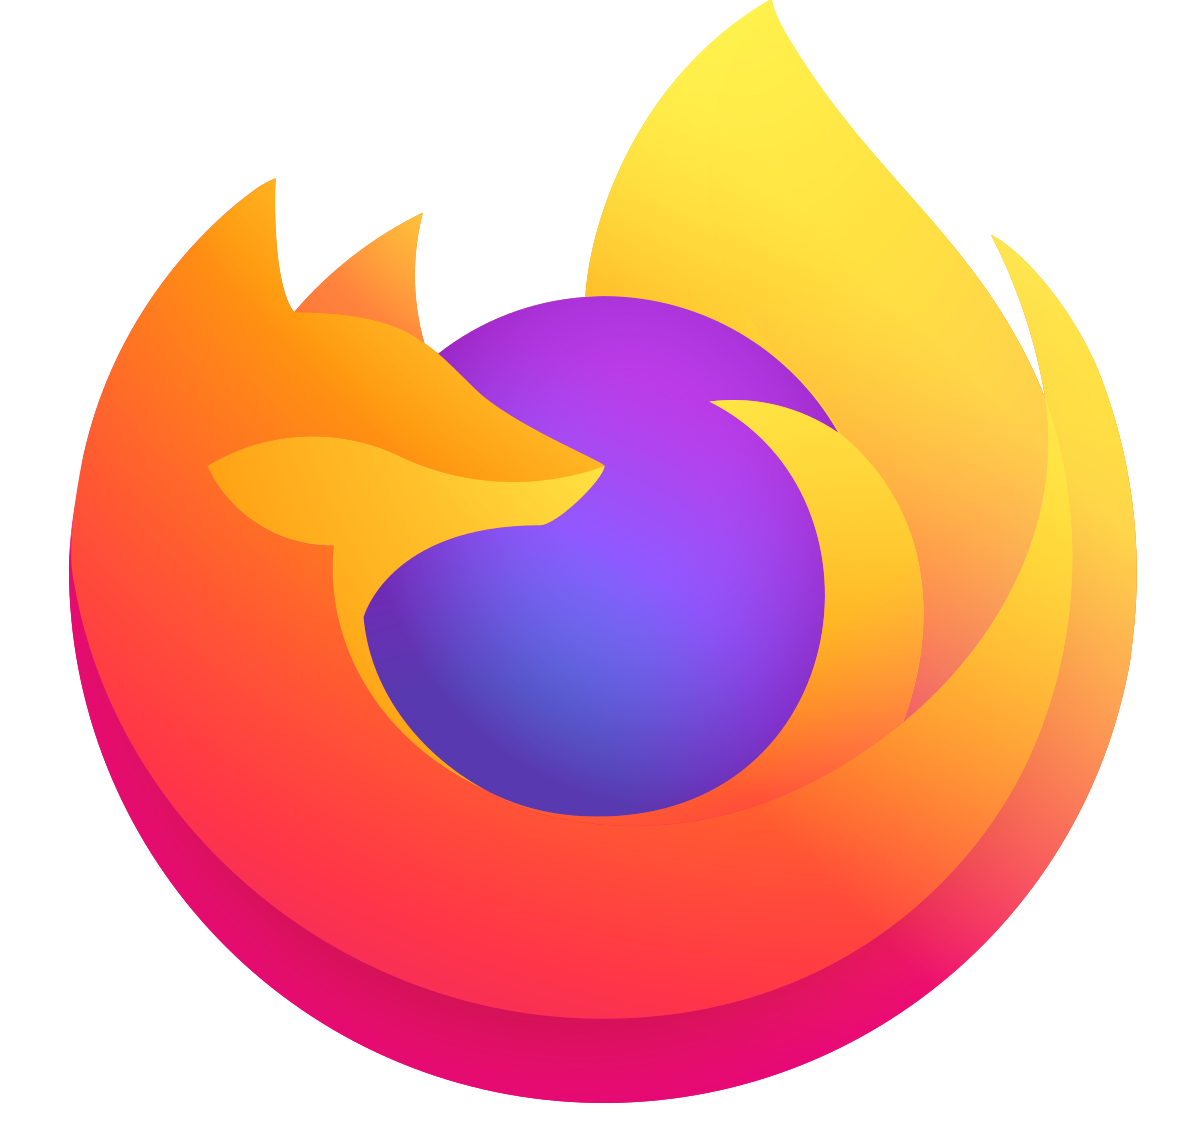 Firefox logo: flaming fox wrapping the world